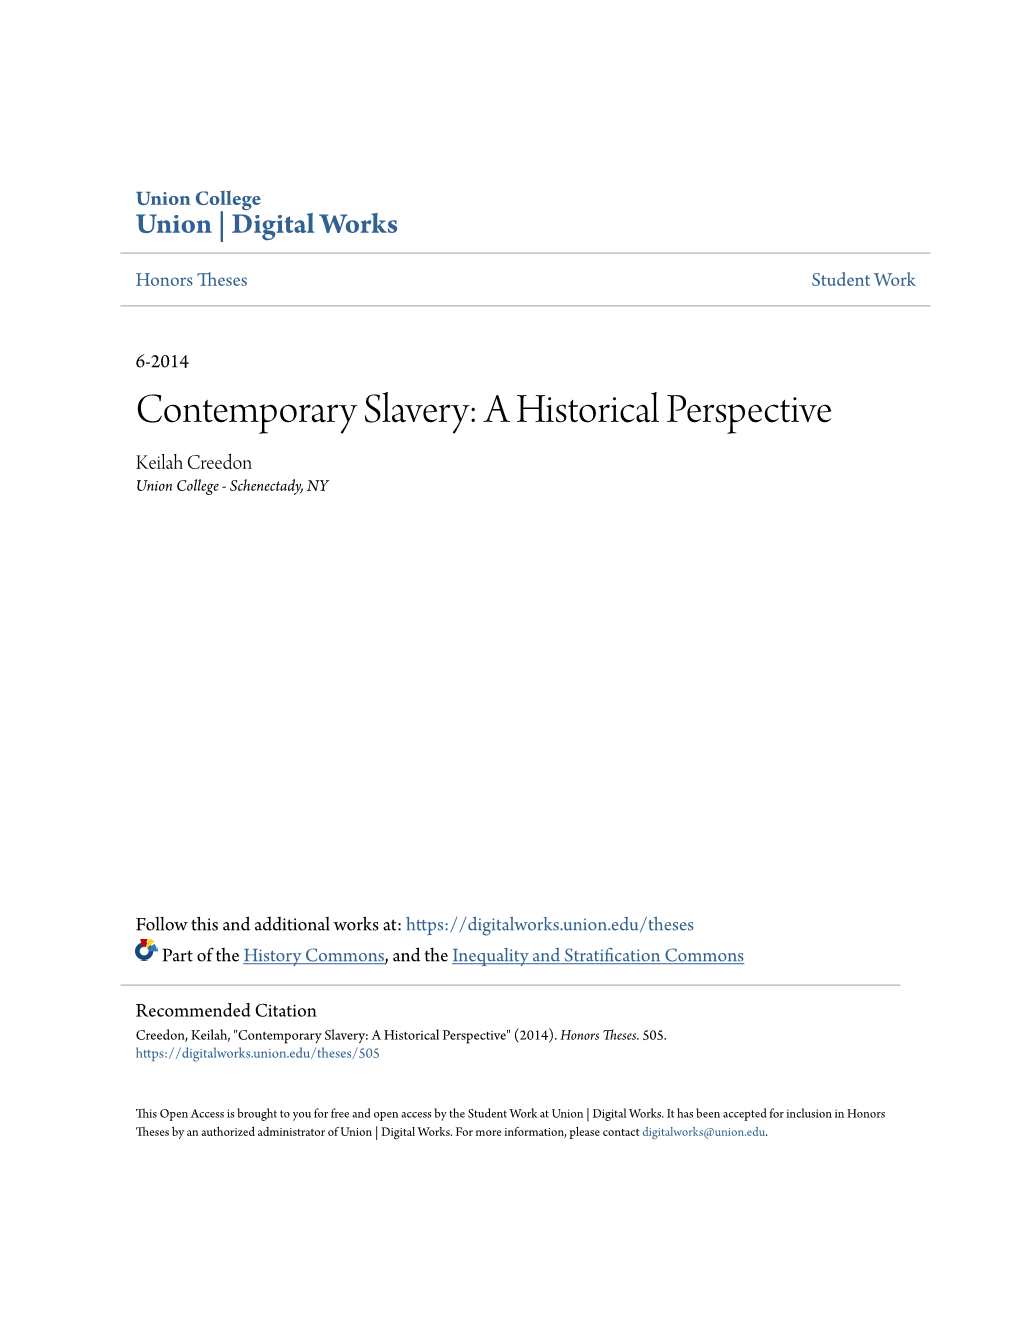 Contemporary Slavery: a Historical Perspective Keilah Creedon Union College - Schenectady, NY